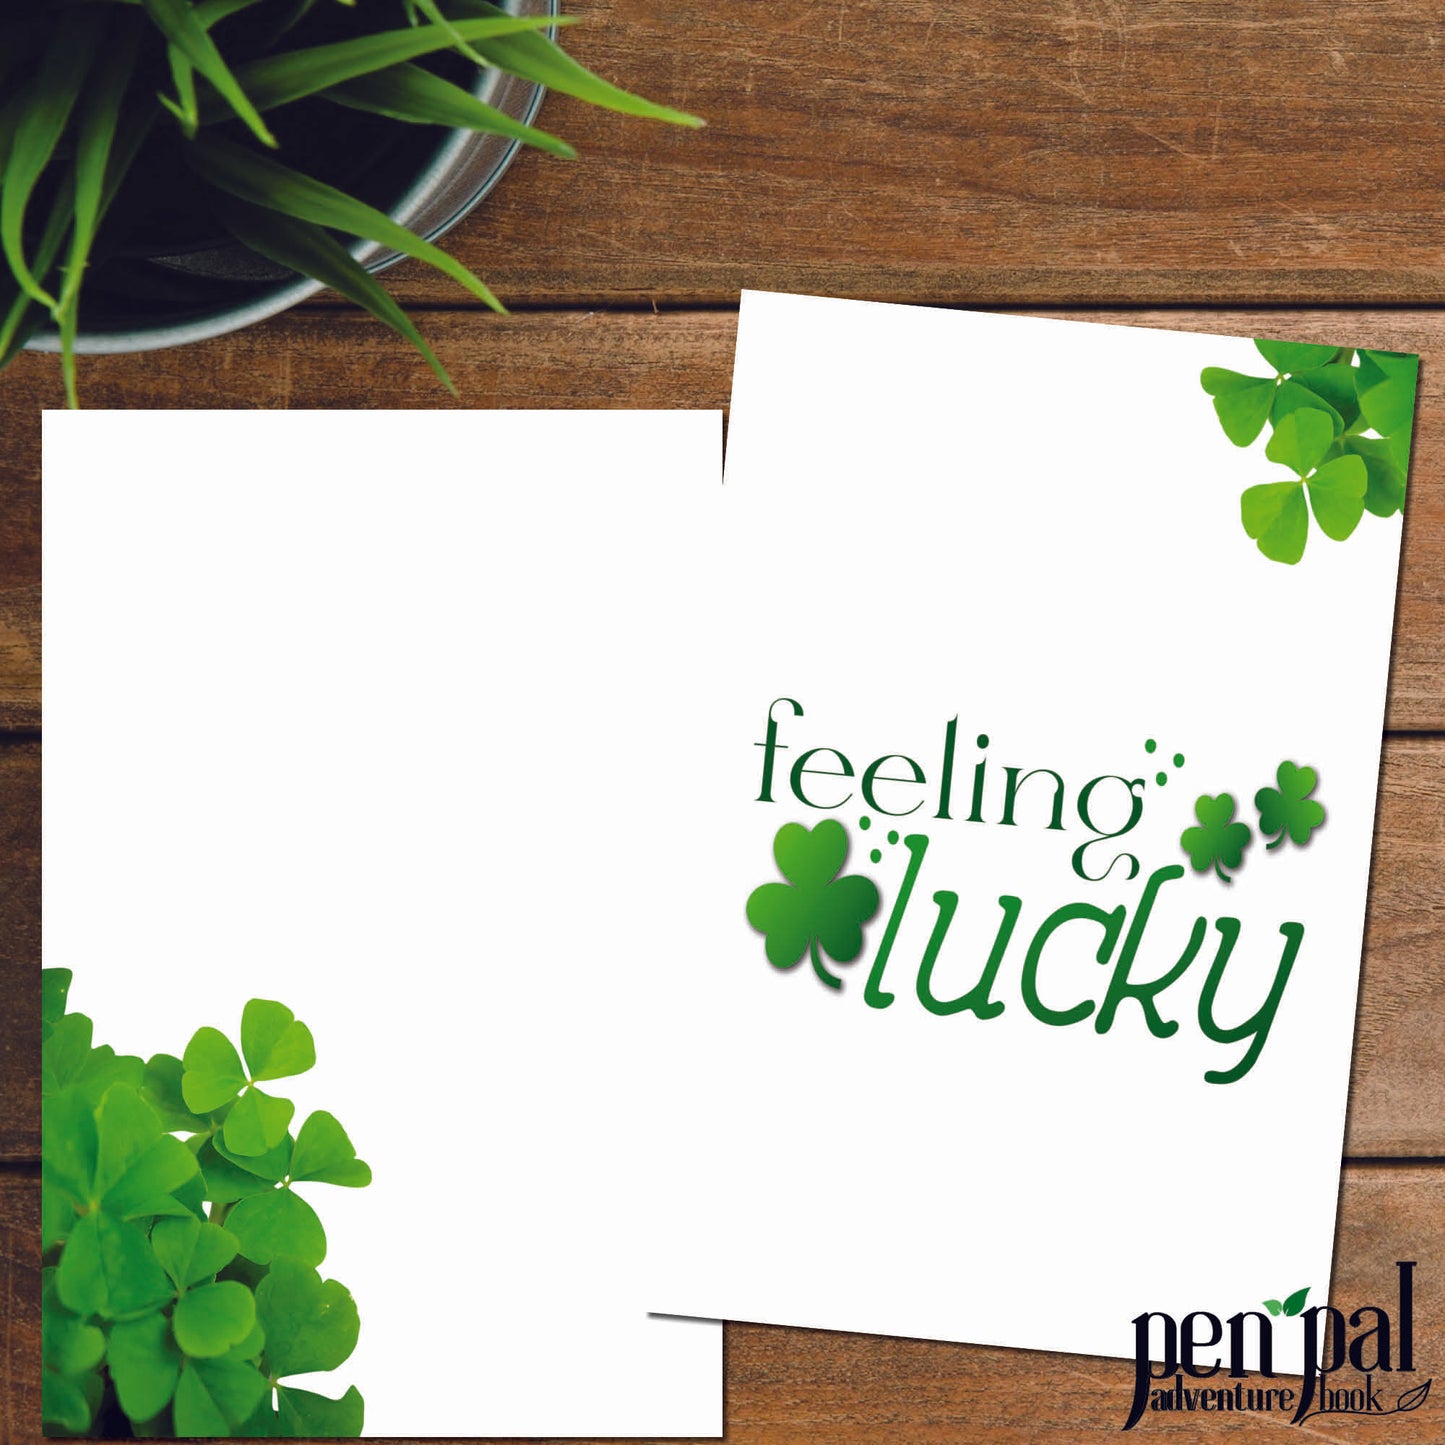 Instant Download-Feeling Lucky Clover Journal Layout-Pen Pal Adventure Book Coordinating Printables